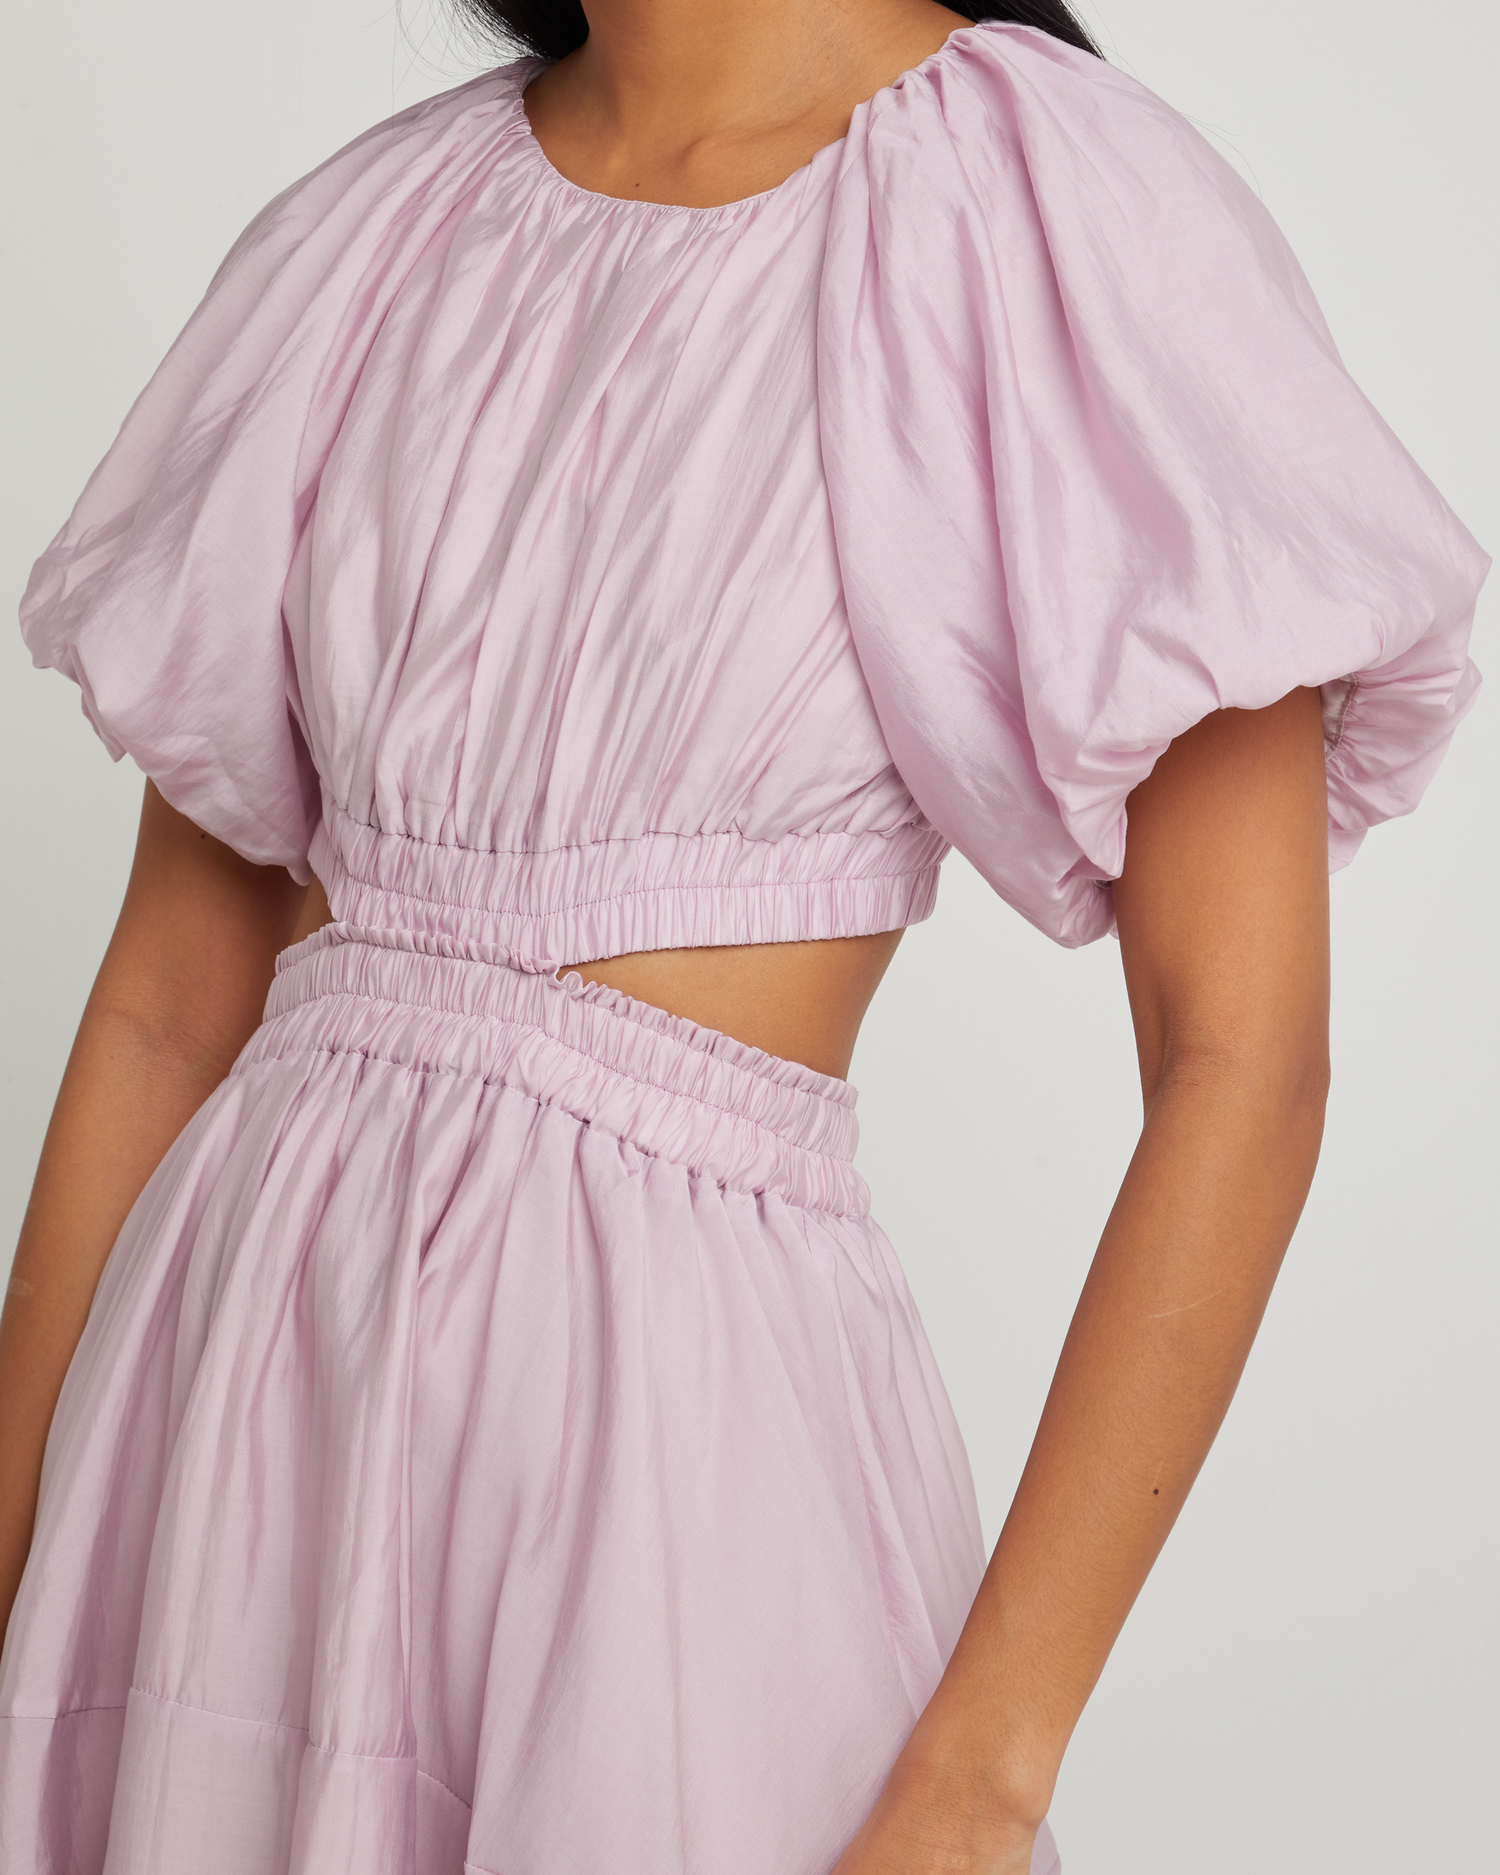 Sixth image of Mayra Dress, a purple mini dress, cut out, open back, high neck, gathered, short sleeves